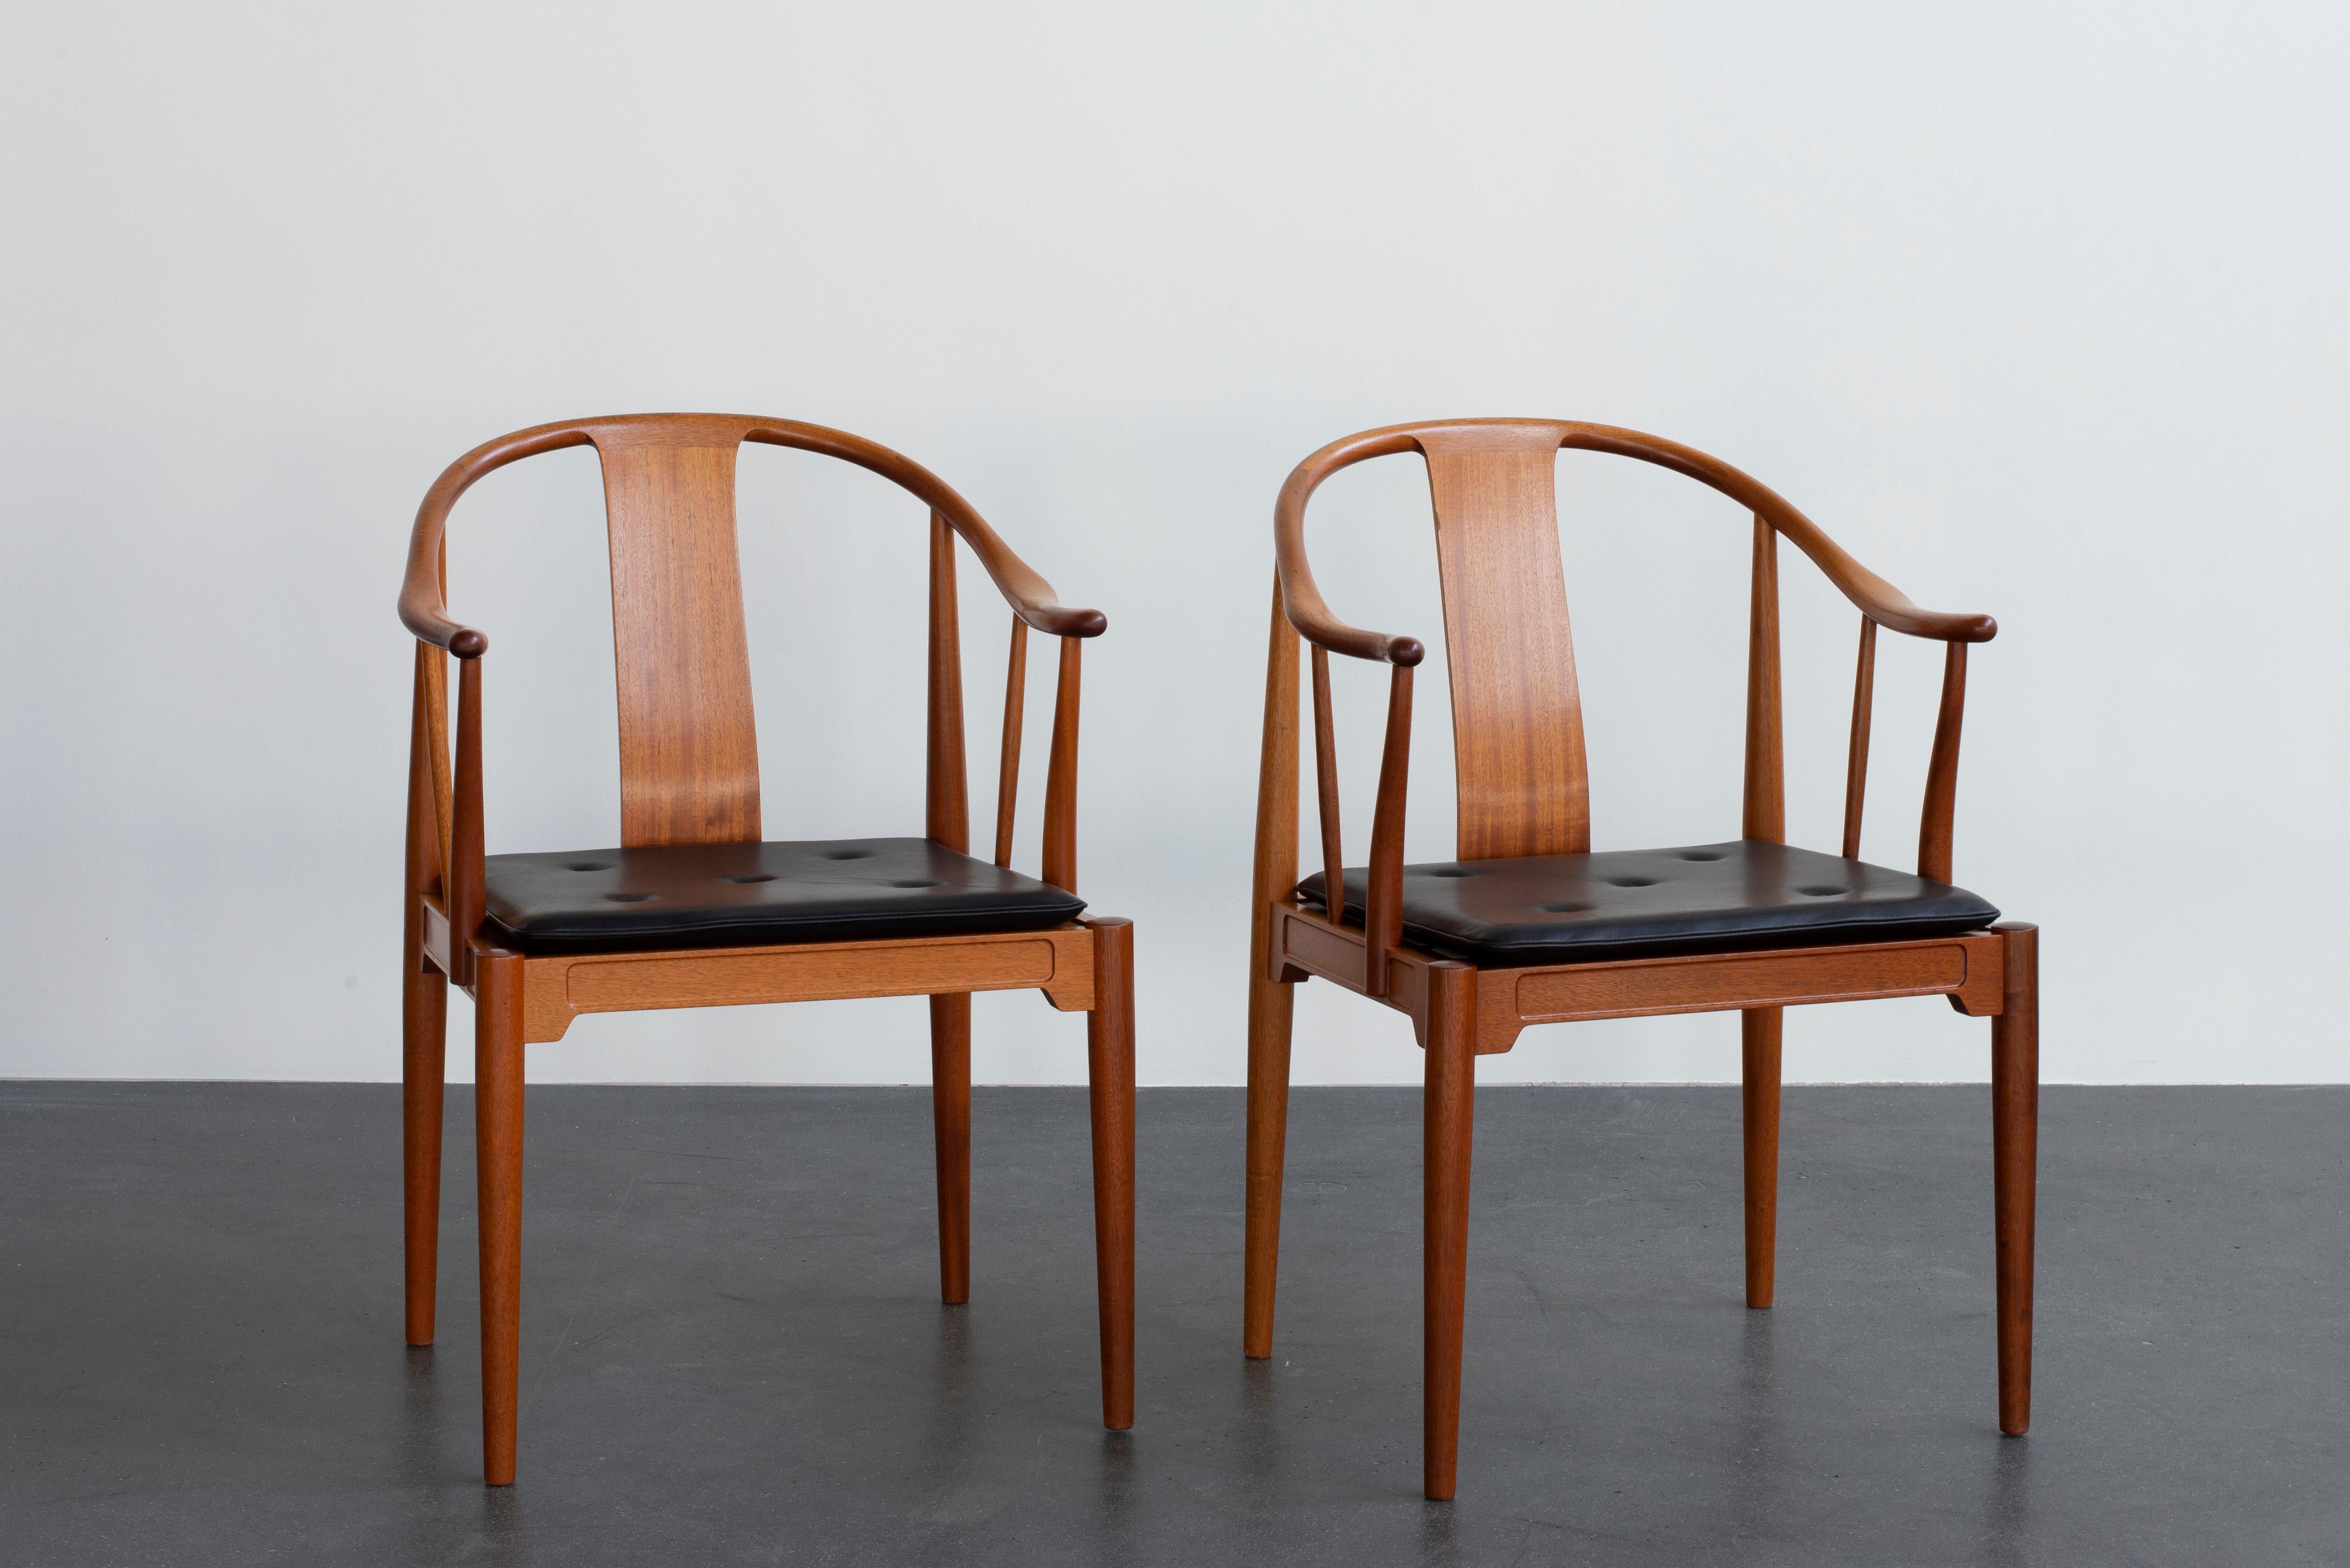 Hans J. Wegner Chinese chairs in mahogany. Loose seat cushions upholstered with leather, fitted with buttons. Executed by Fritz Hansen.

